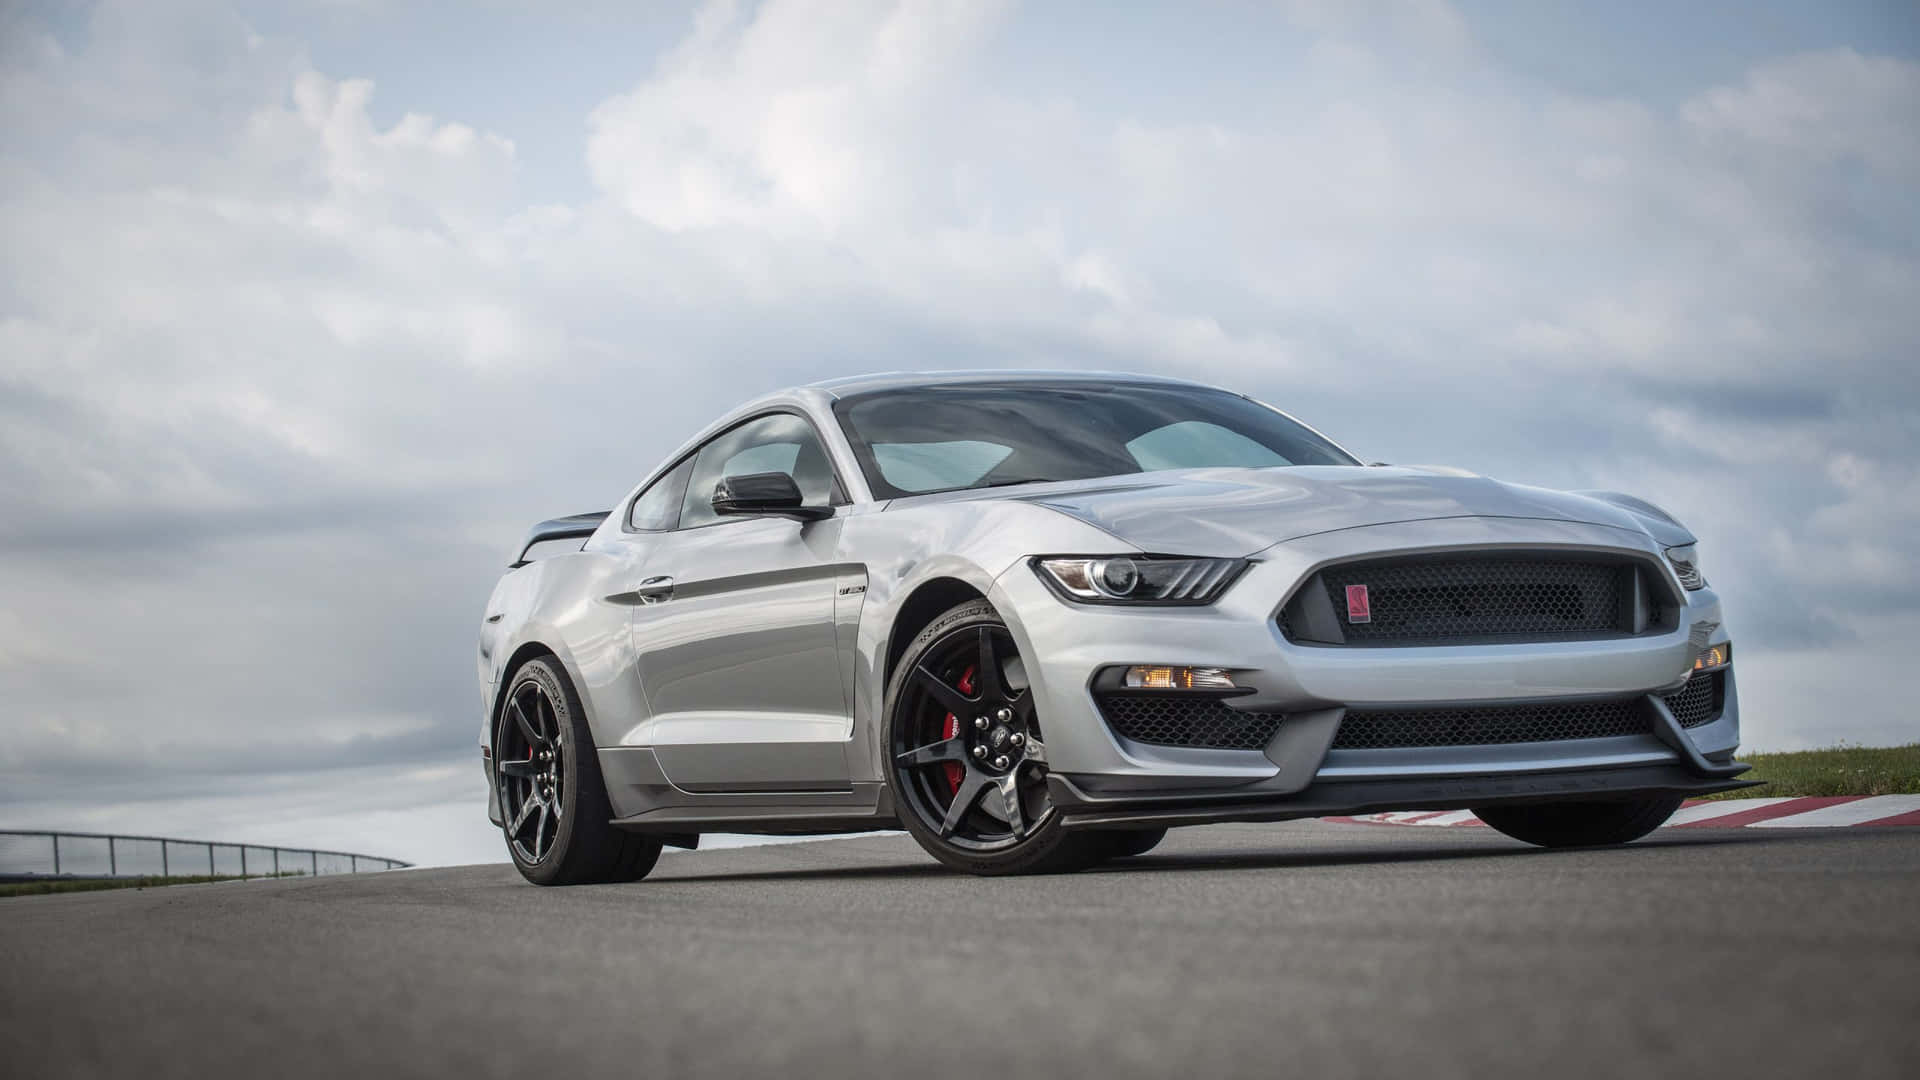 Sleek Ford Mustang Gt350r Making Waves On The Race Tracks Wallpaper